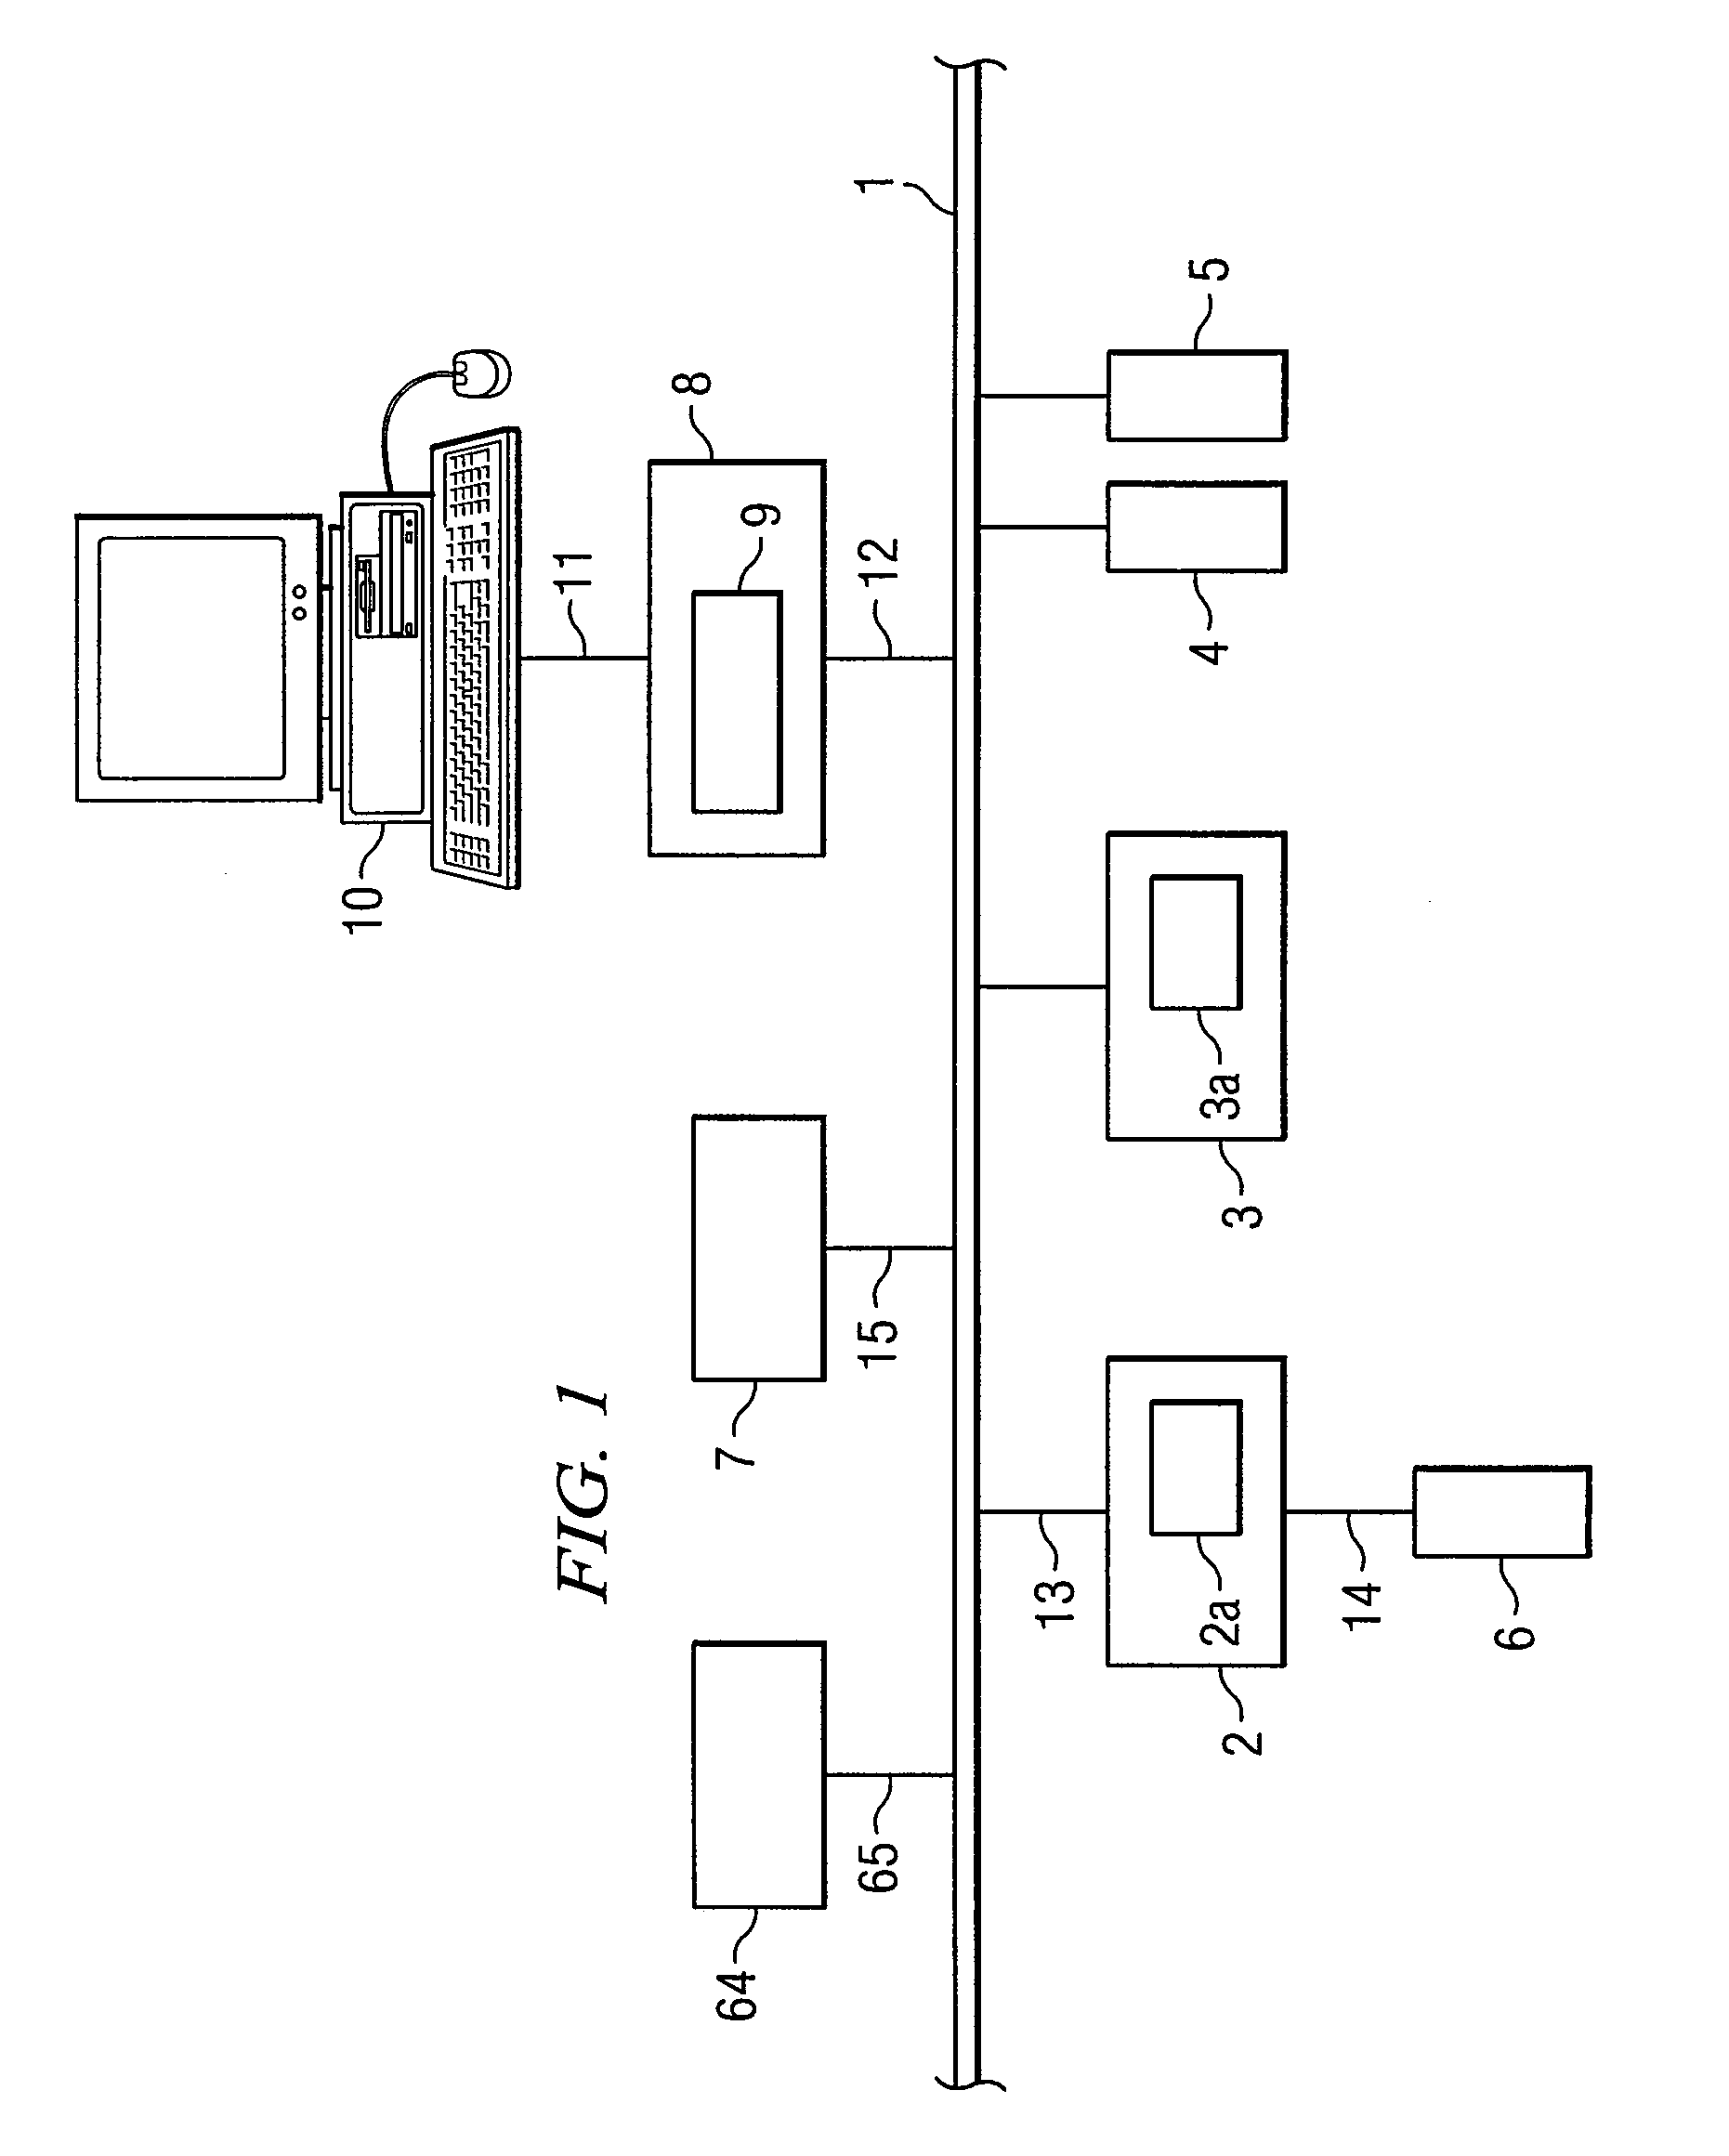 Synchronous clocked communication system with decentralized input/output modules and method for linking decentralized input/output modules into such a system